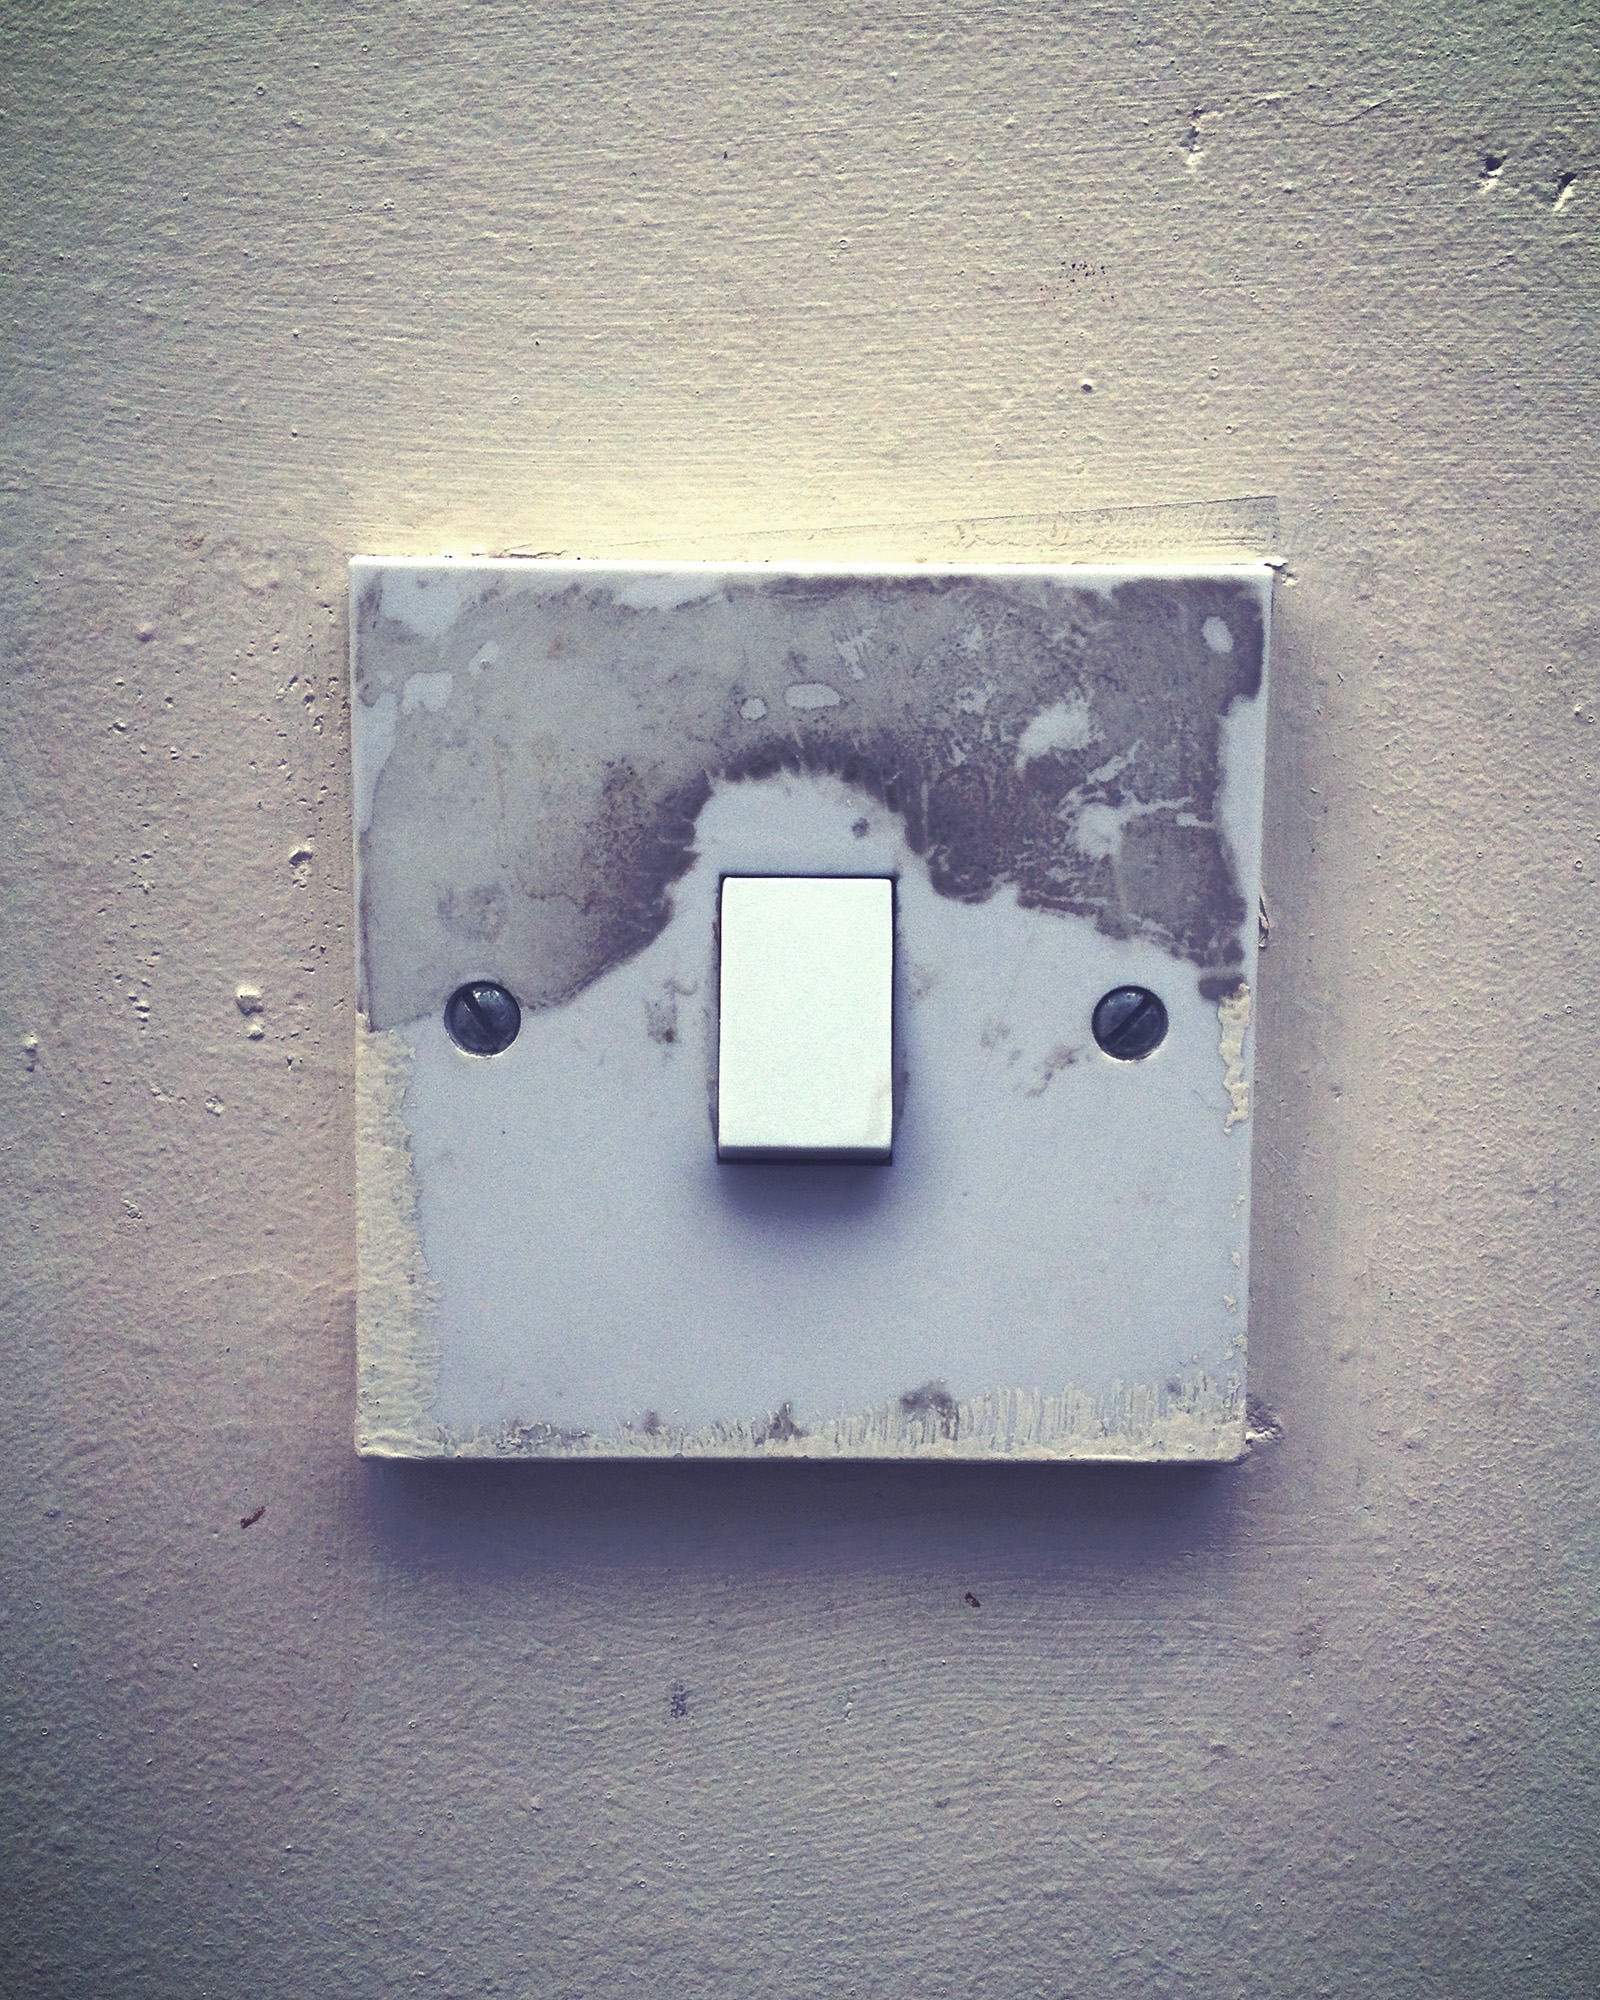 a square light switch mounted to a gray wall